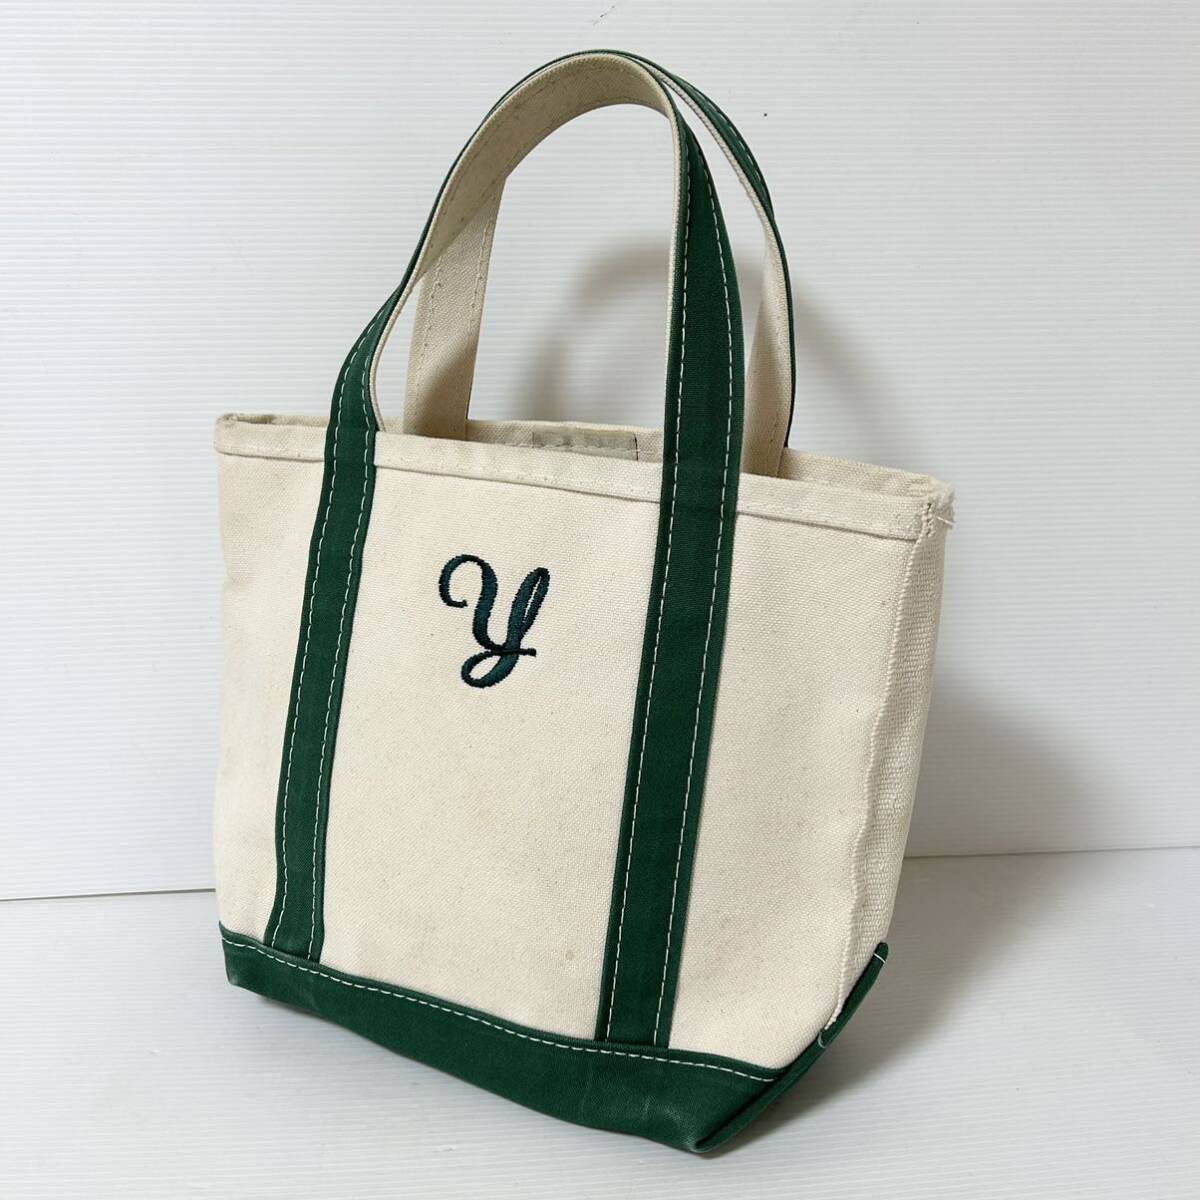 【80s90s/USA製】L.L.Bean BOAT AND TOTE エルエルビーン トートバッグ ハンドバッグ ヴィンテージ キャンバス ビーントート ＊AGの画像1